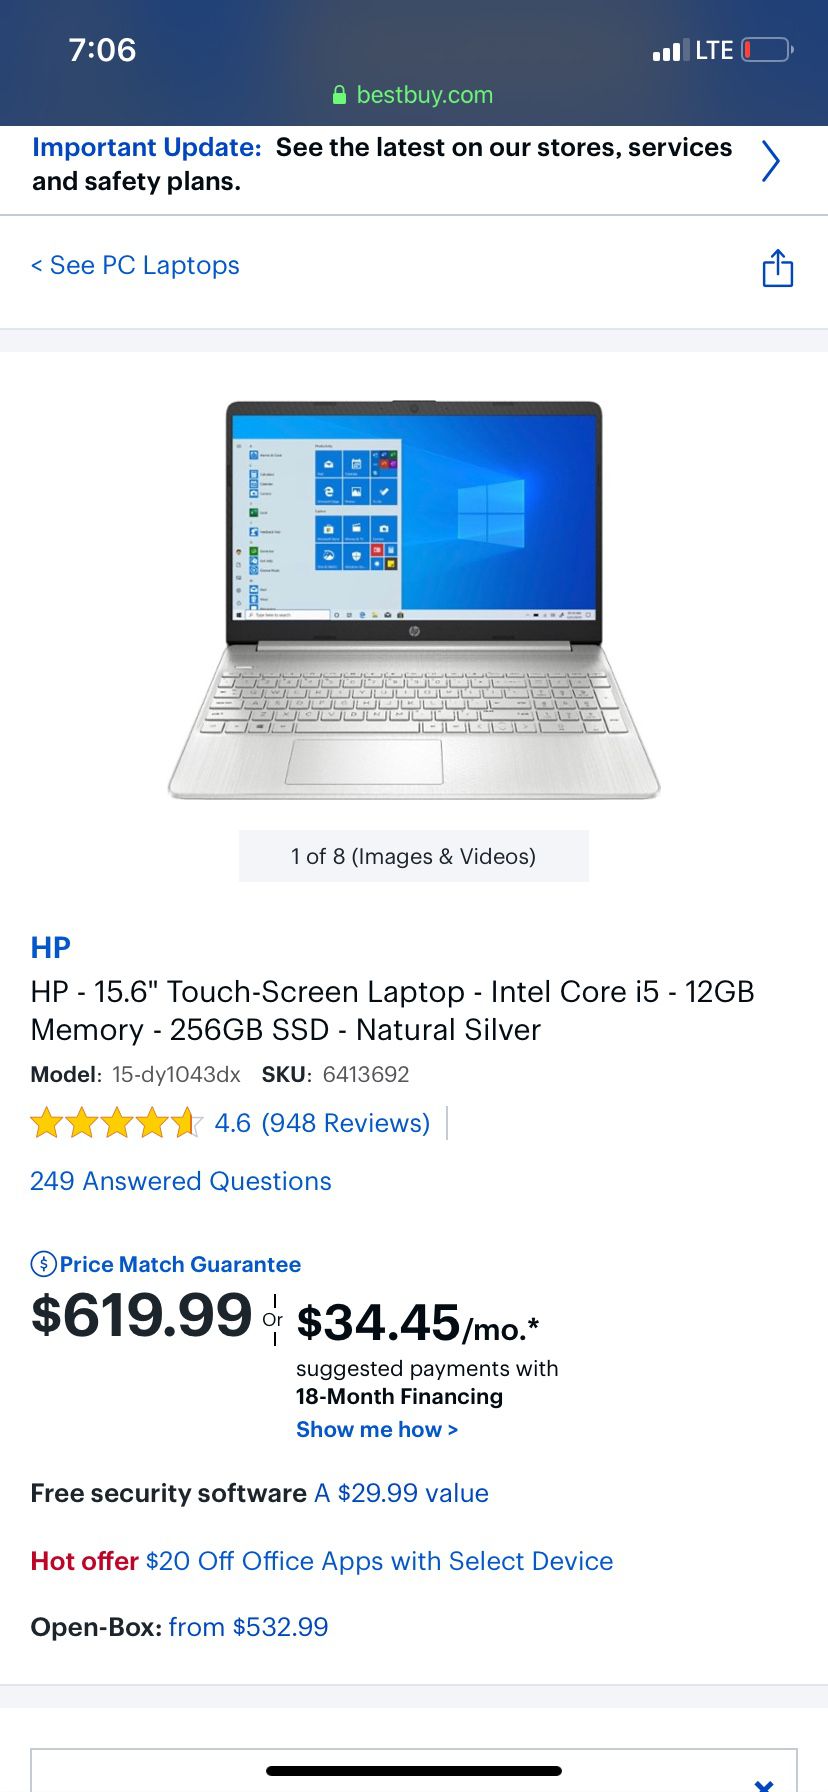 Brand New HP 15.6” Touch Screen Laptop Computer